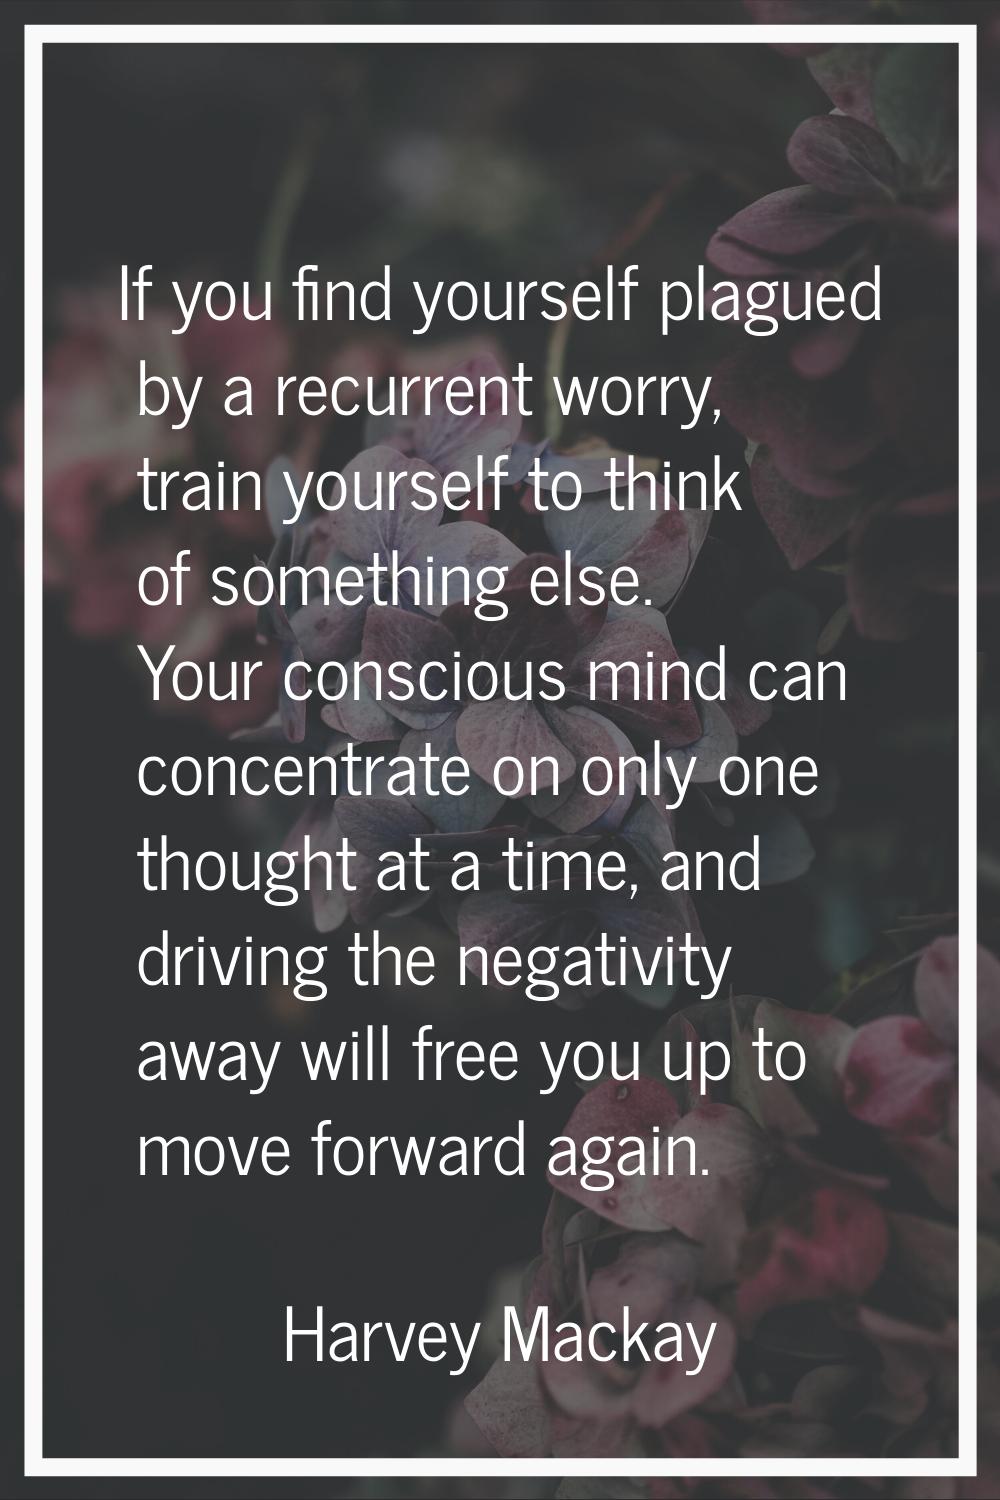 If you find yourself plagued by a recurrent worry, train yourself to think of something else. Your 